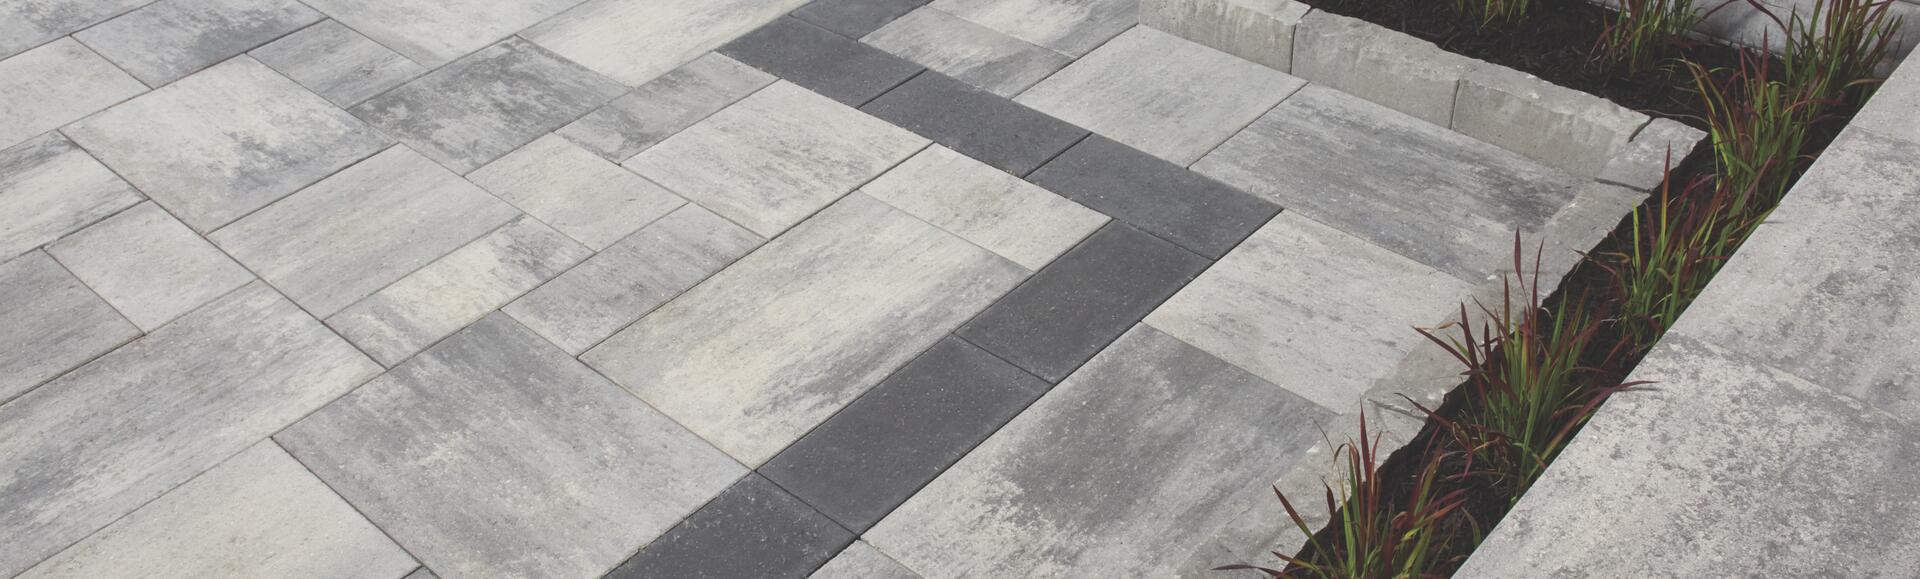 Nueva Paver in Marble grey with Onyx inset by Oaks Landscape